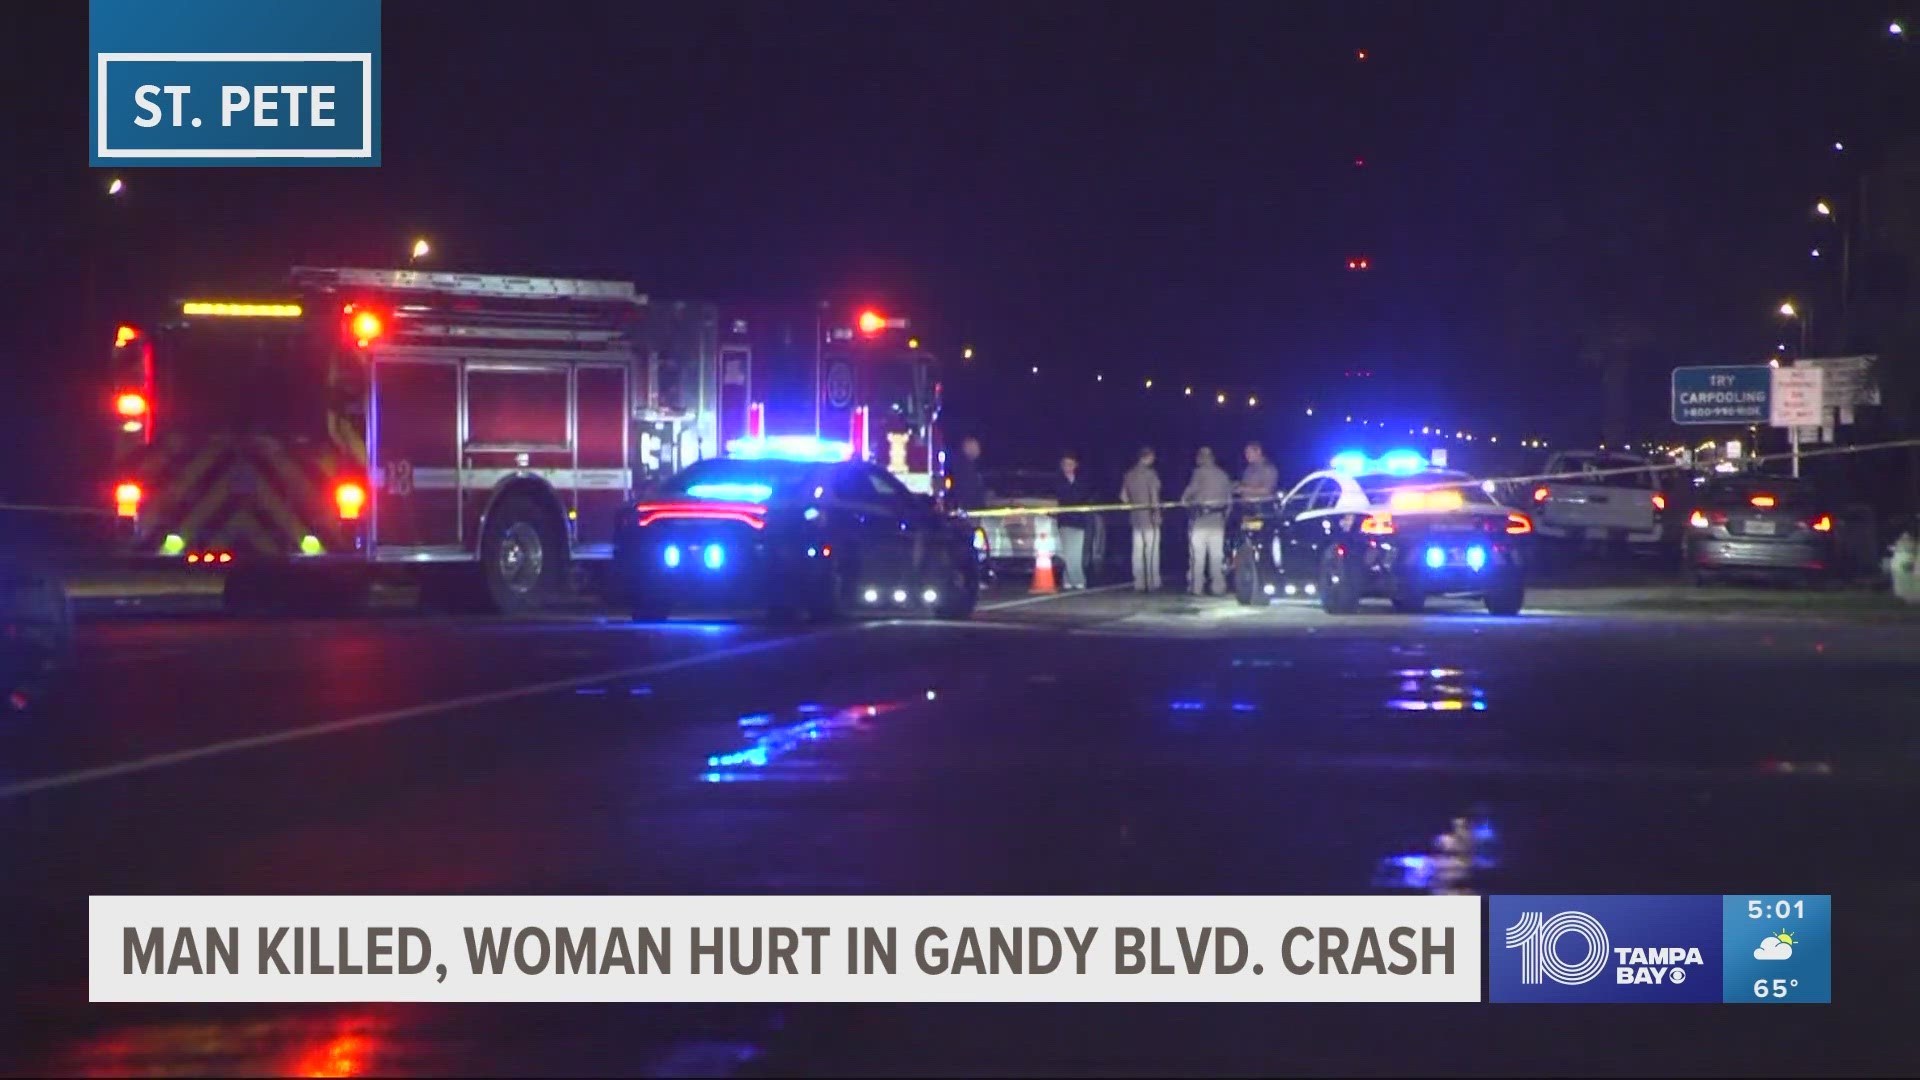 The woman got out of her car to help the pedestrian she hit when she was hit by a car.